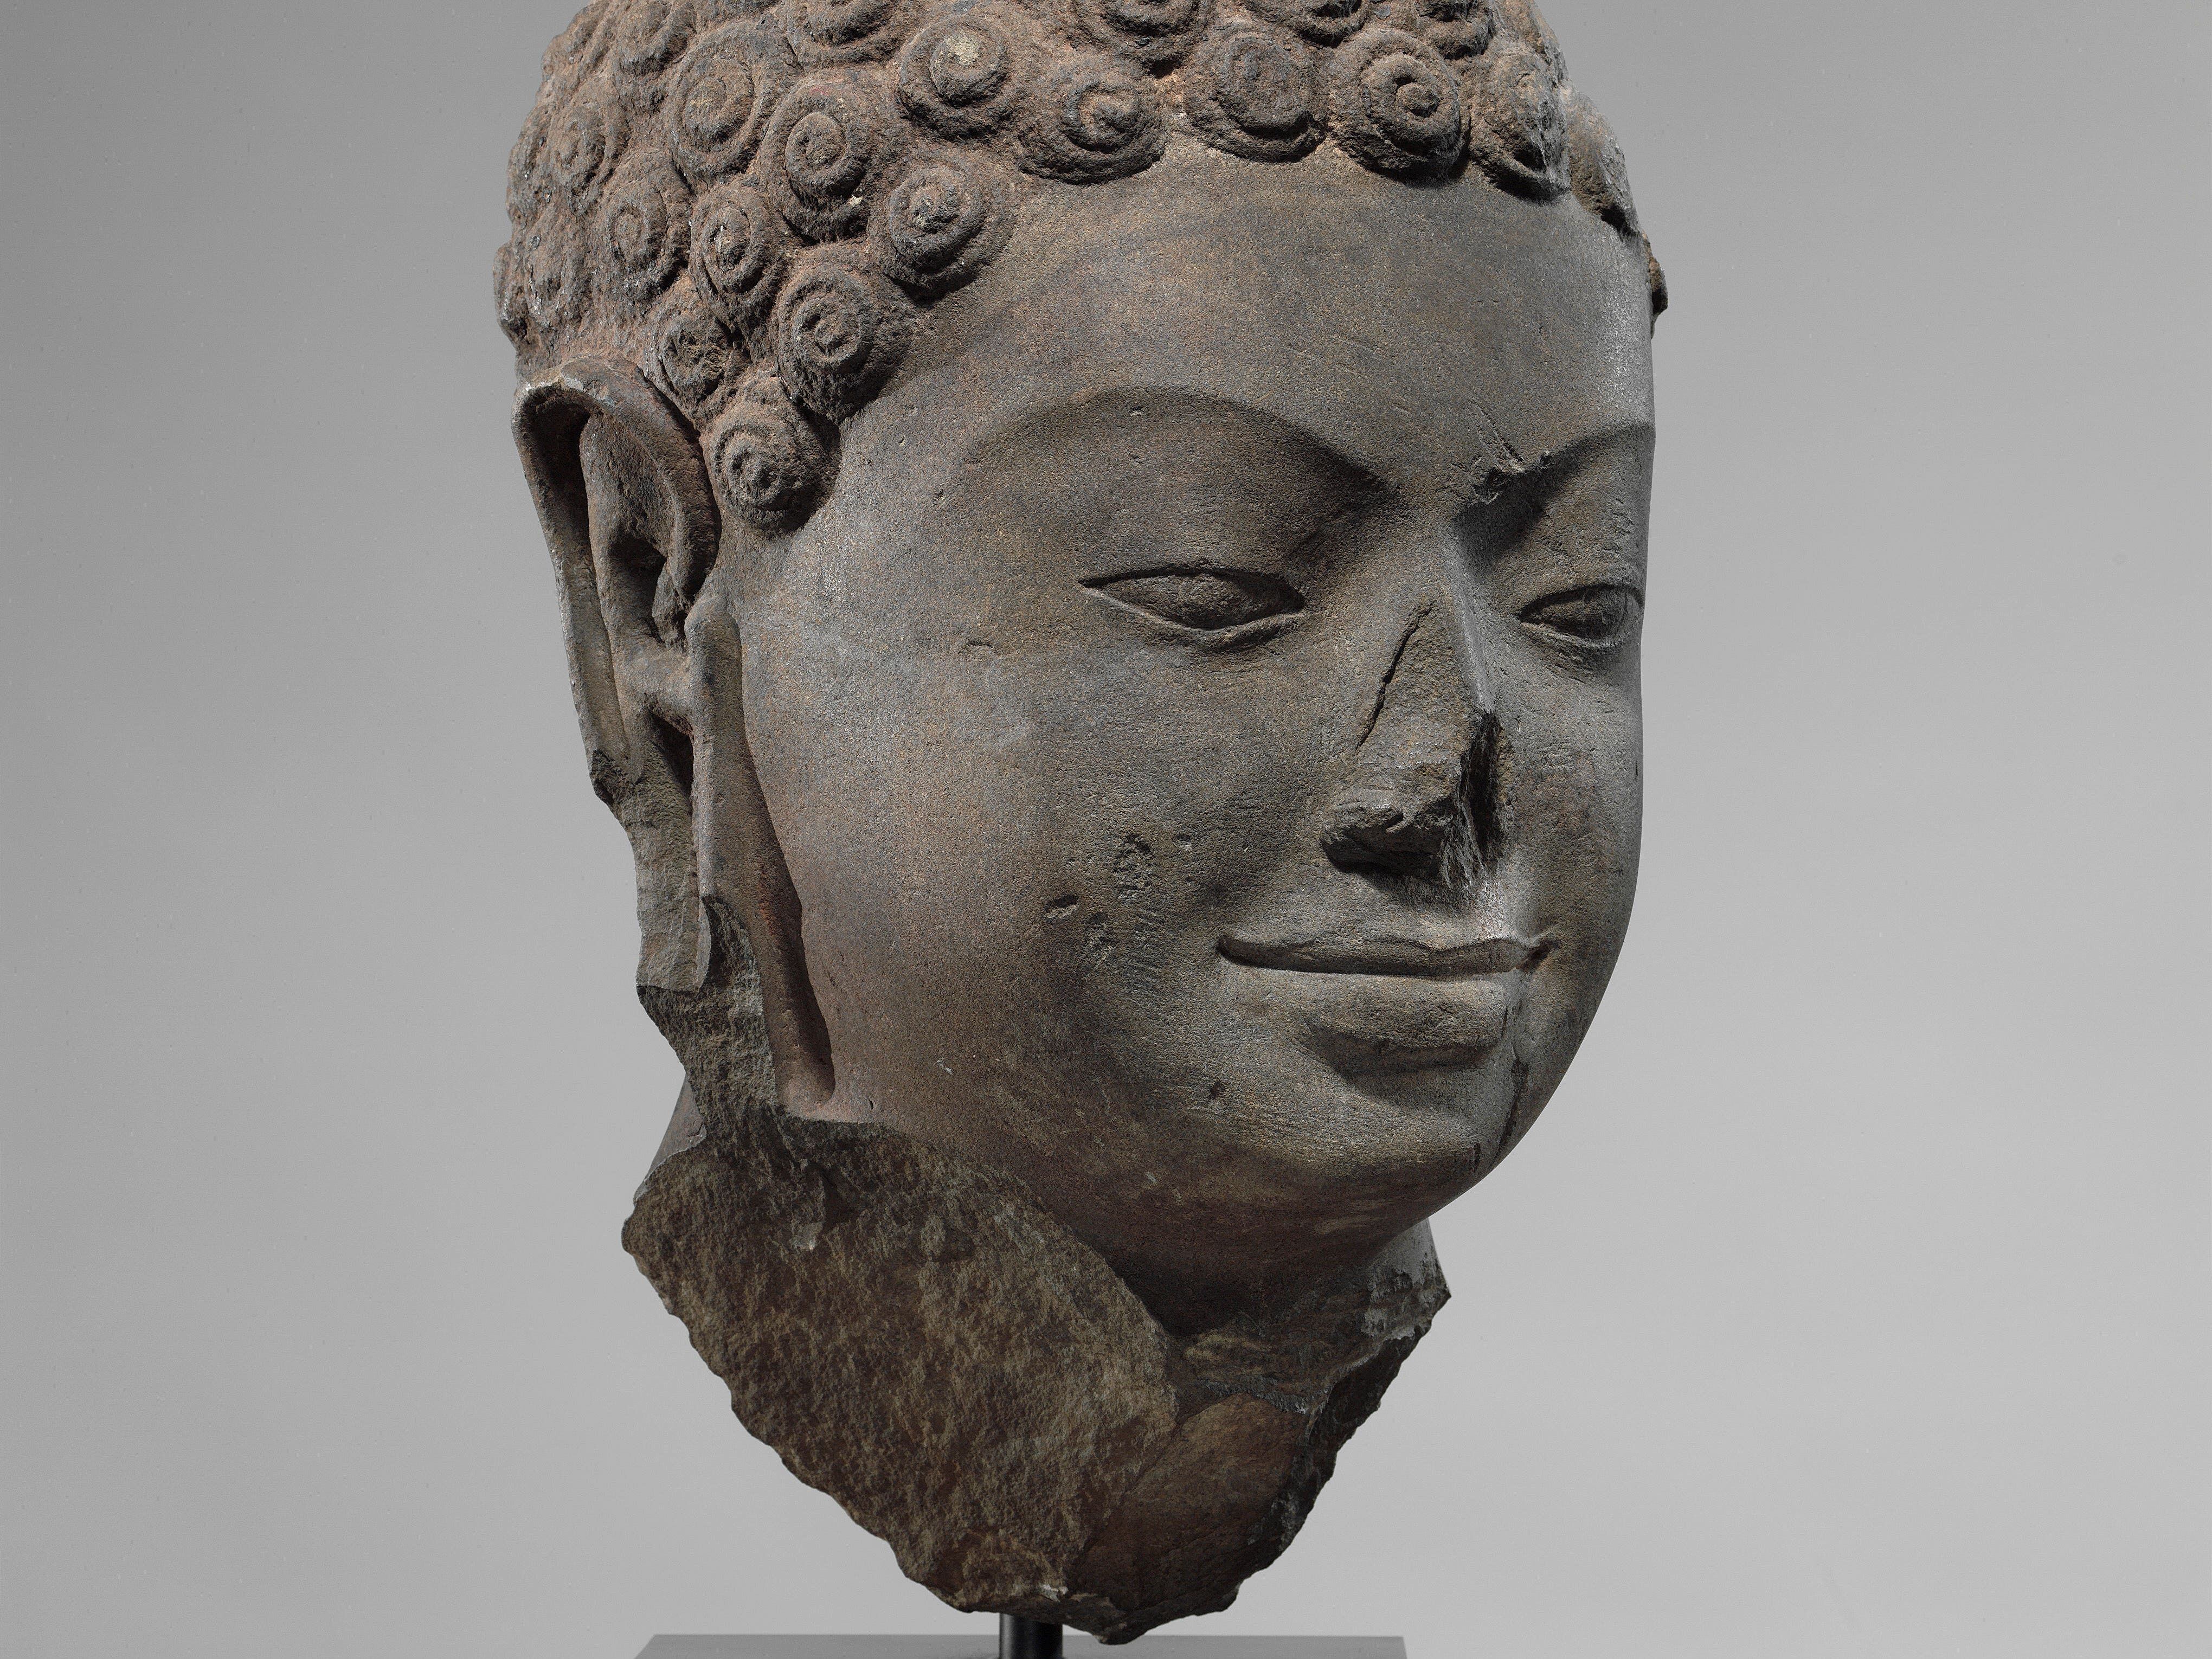 New York museum to return ancient sculptures stolen from Cambodia and Thailand